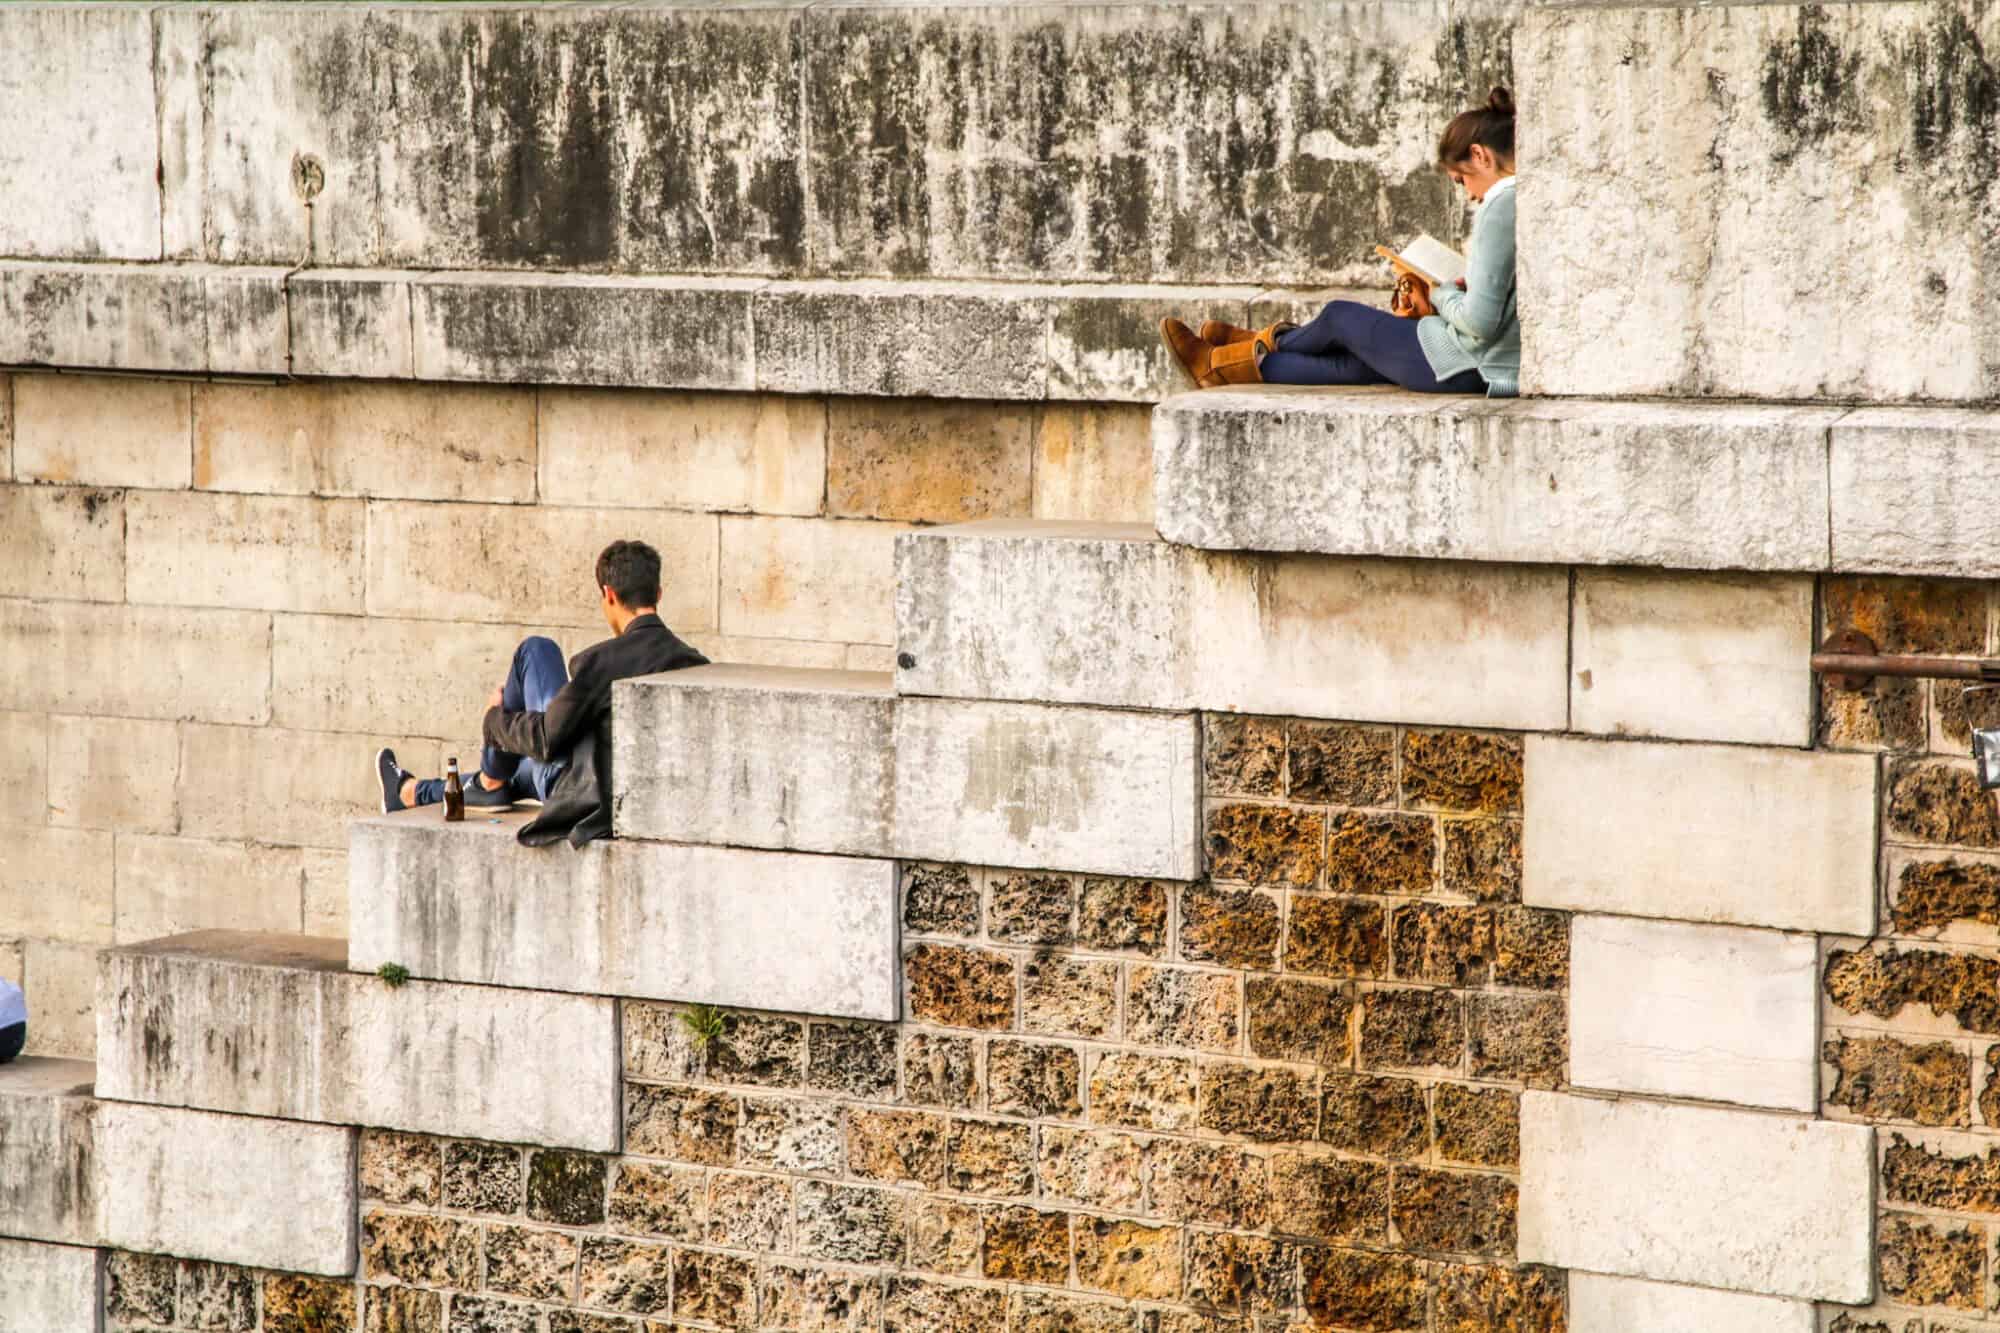 People are seen sitting on large stone steps near the Seine River in Paris; A man sits holding his leg and a woman a few steps above sits while reading a book.